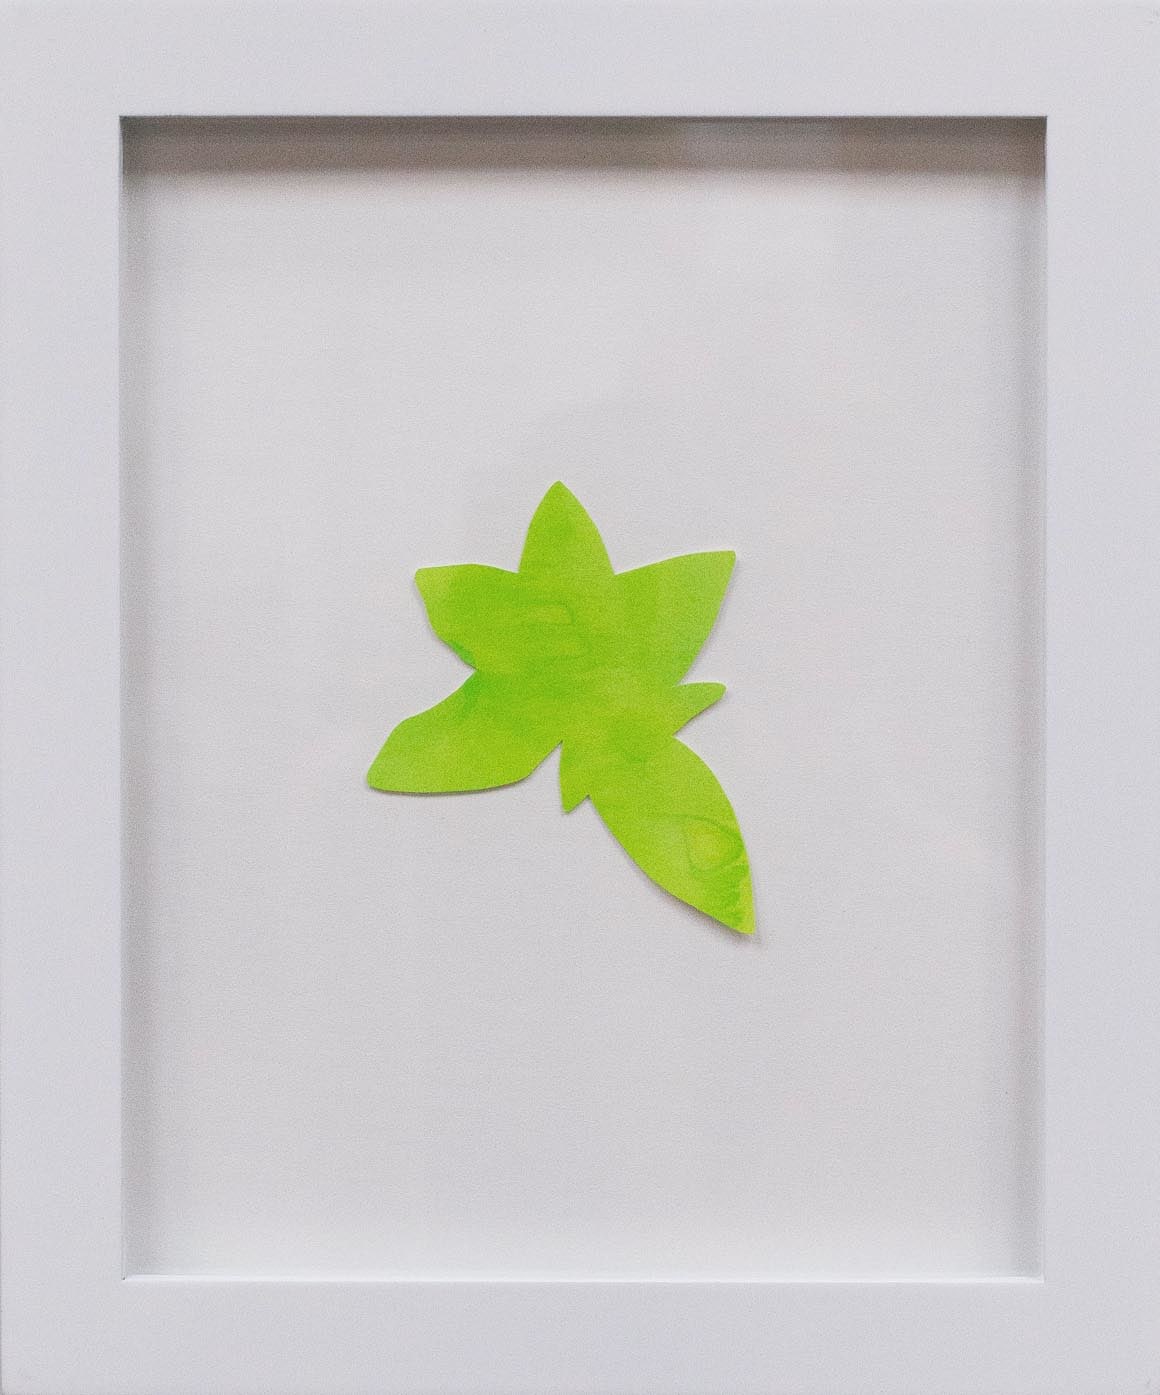 Hannah Cole  Little Yellow Star Weed, 2018  watercolor on cut paper  Framed: 10h x 8w in 25.40h x 20.32w cm  HC_054